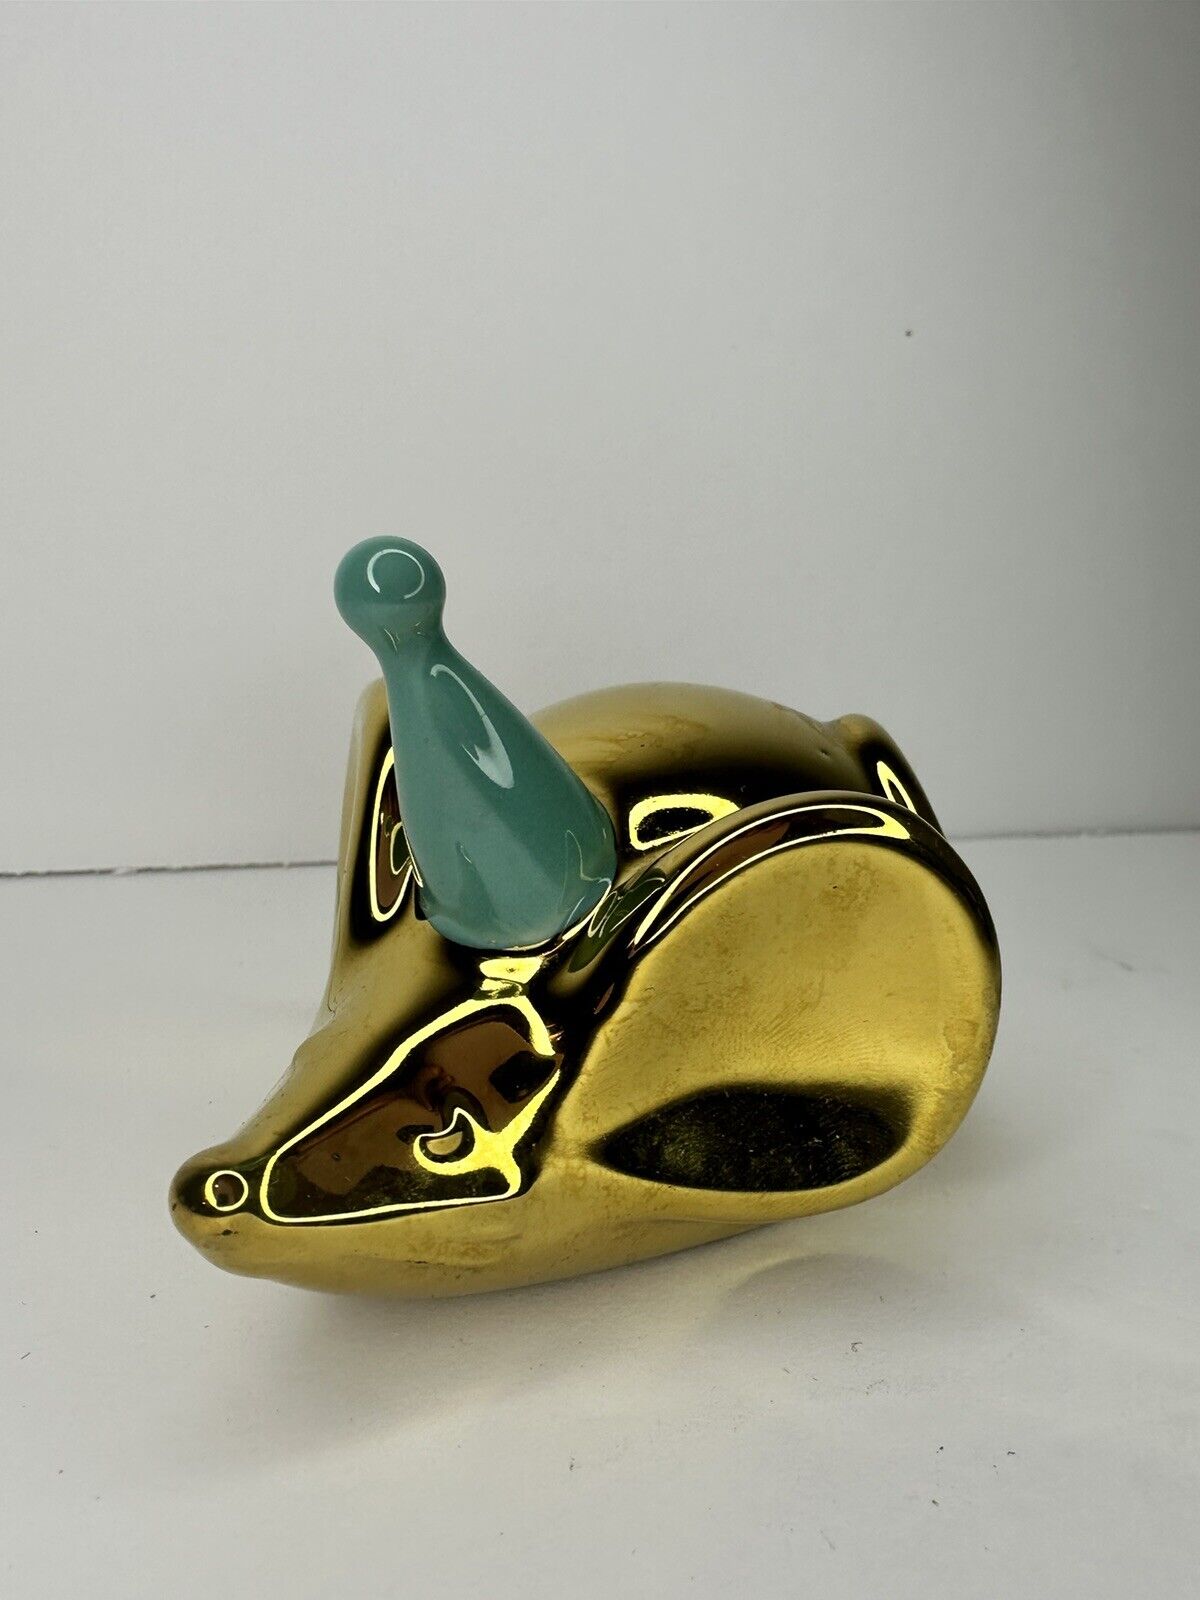 Target - Oh Joy Metallic Gold Ceramic Mouse Figure w/Teal Birthday Party Hat